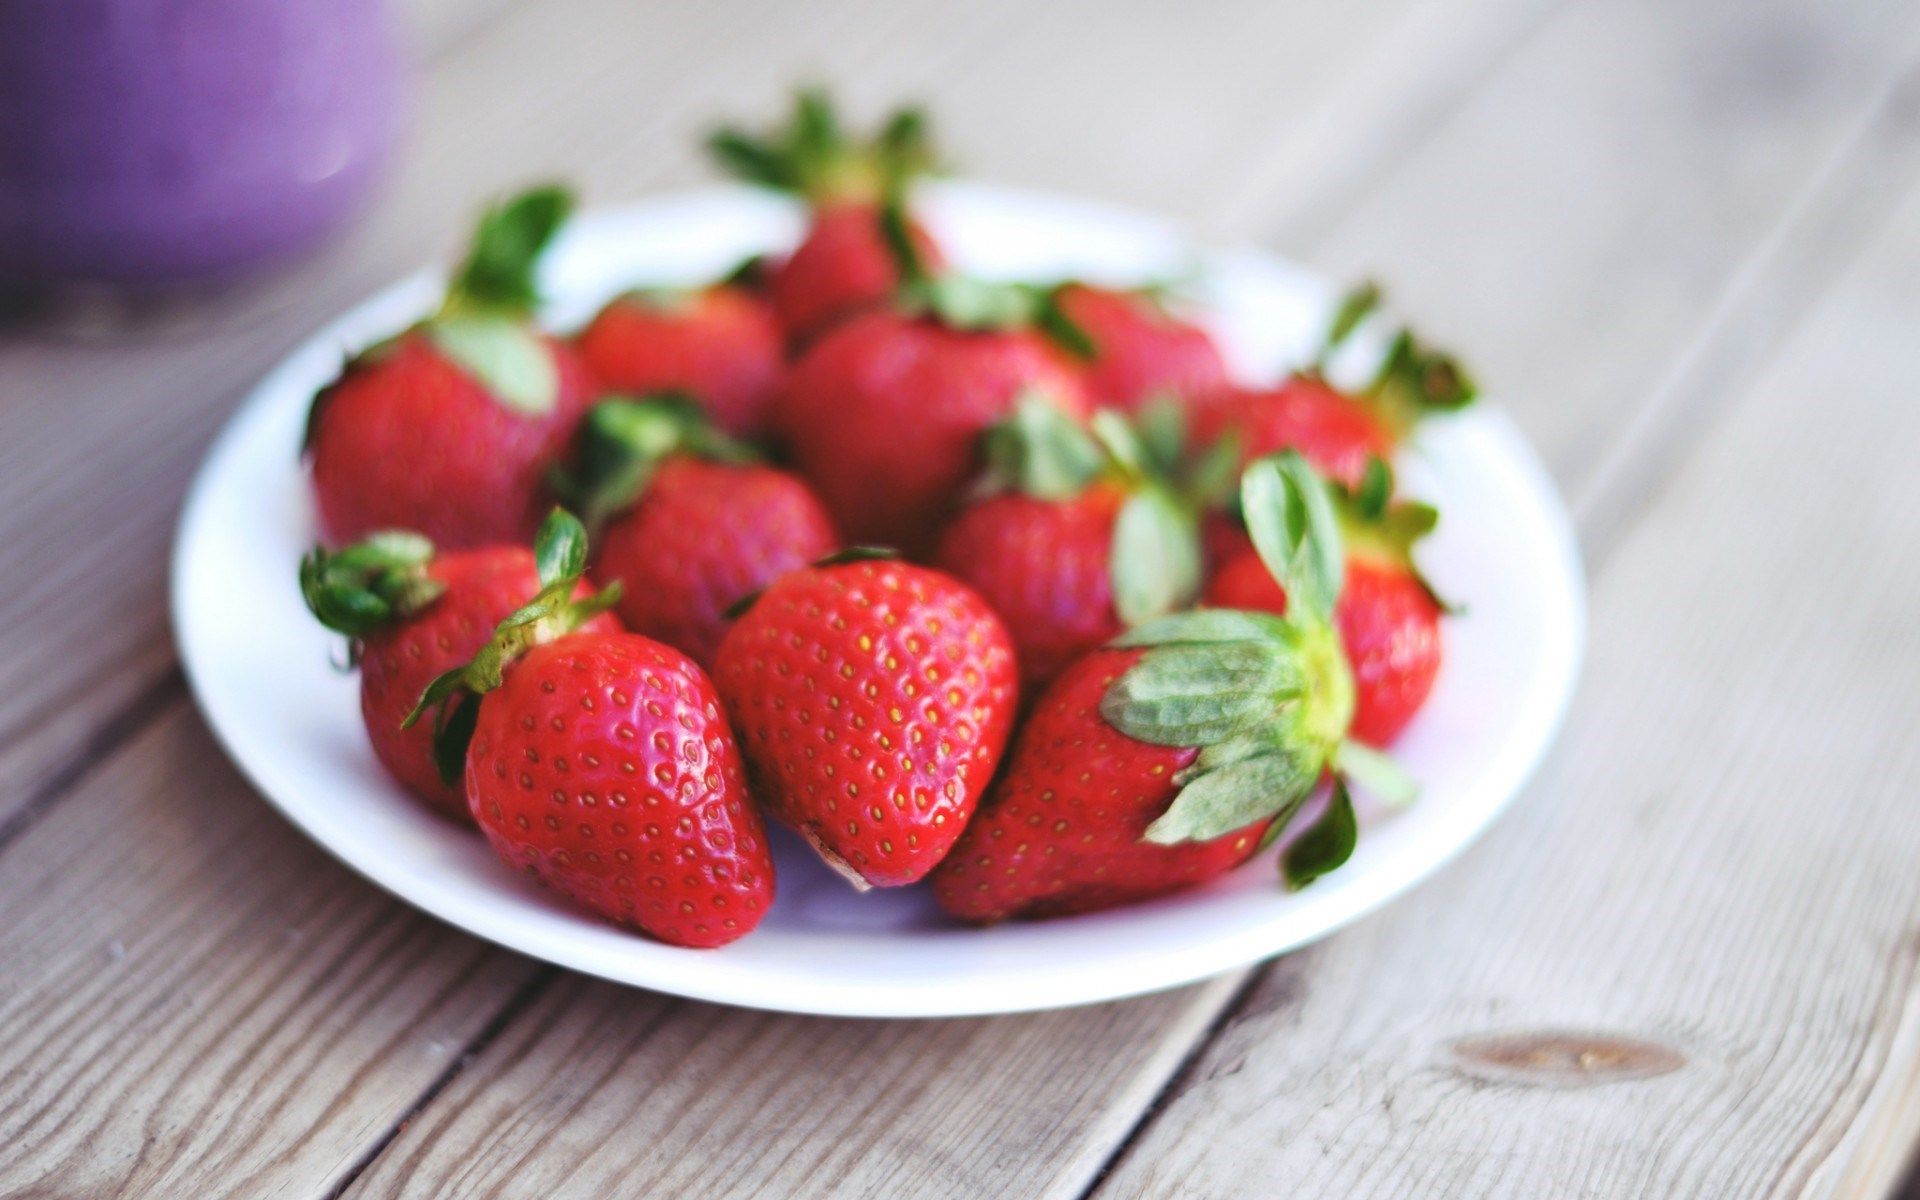 HD wallpaper, Strawberry, Table, Berry, Plate, Leaves, Green